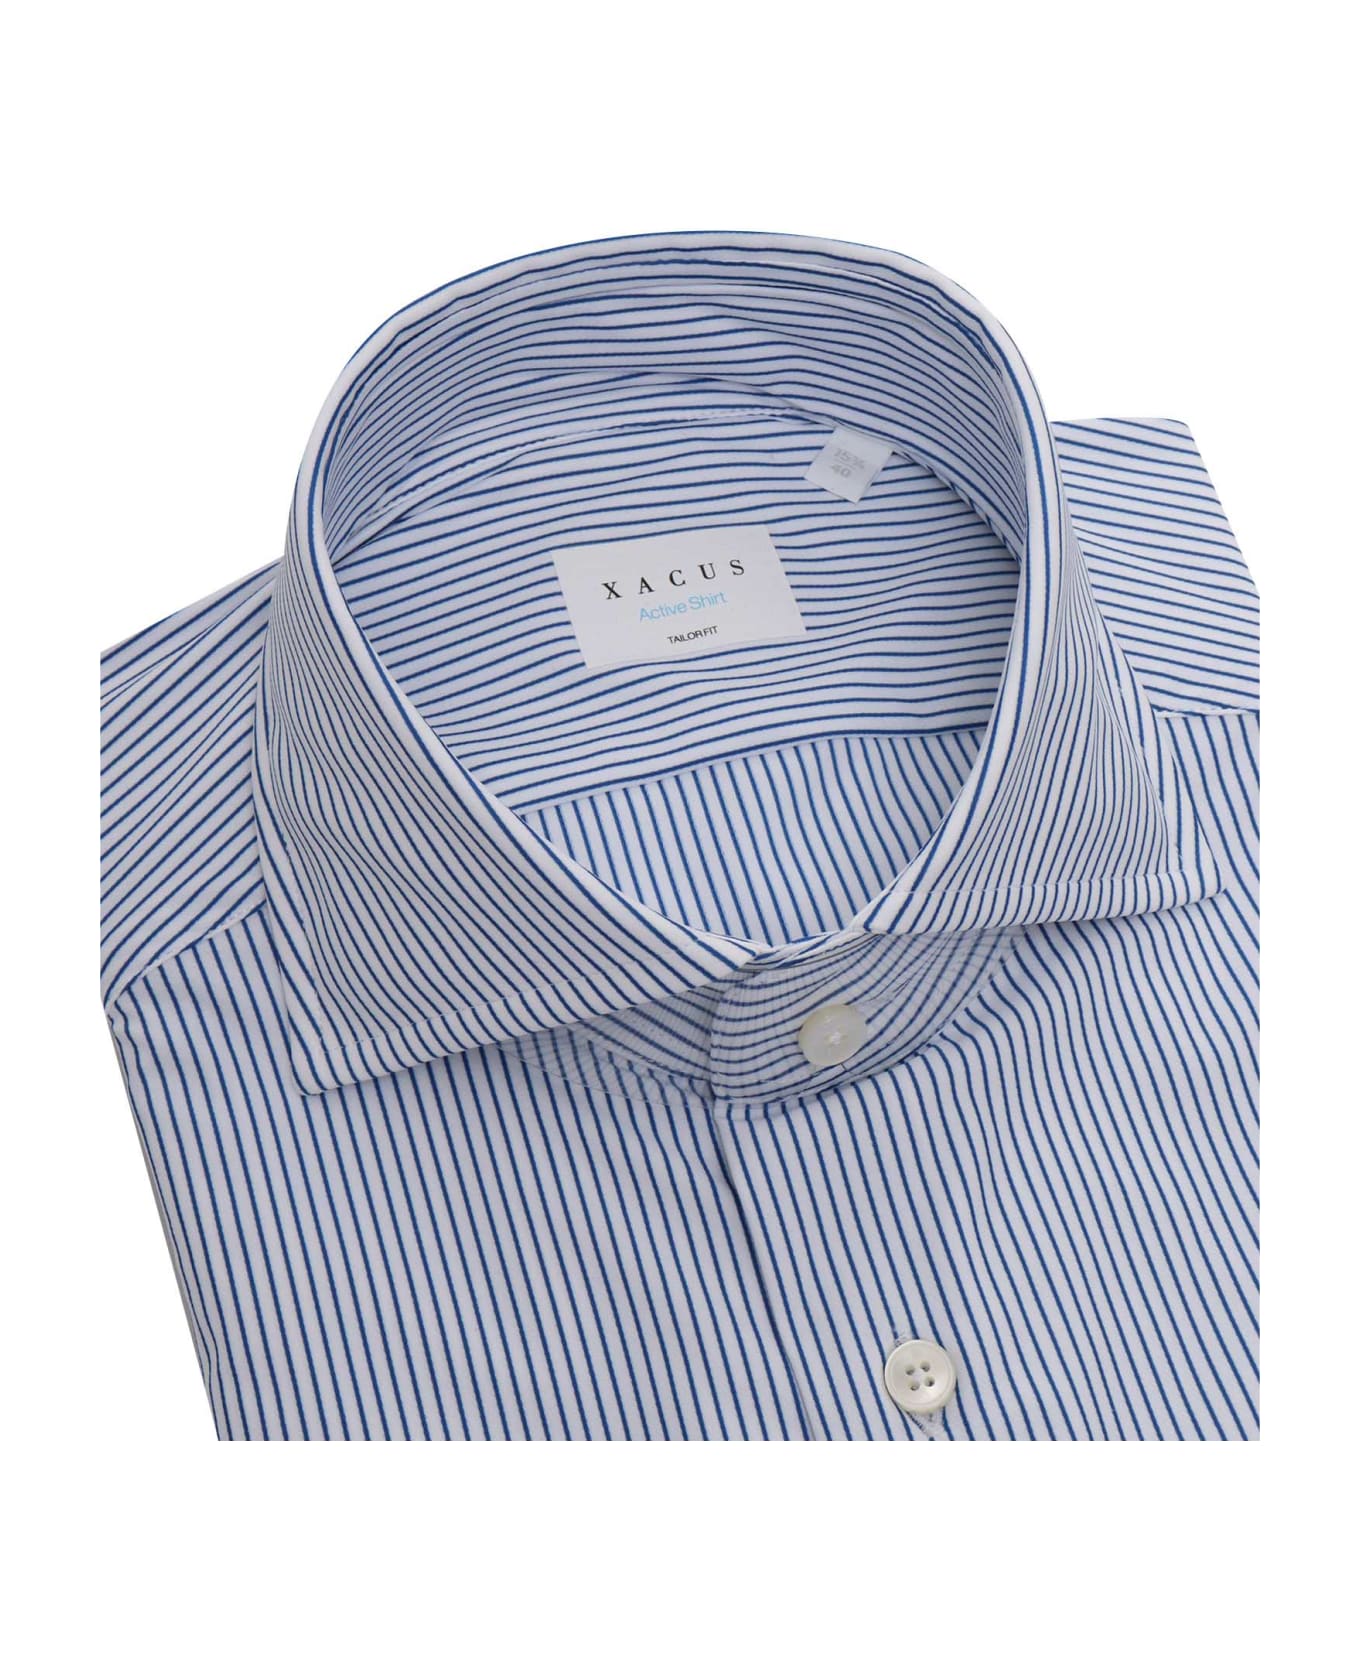 Xacus Light Blue Shirt With Stripes - MULTICOLOR シャツ